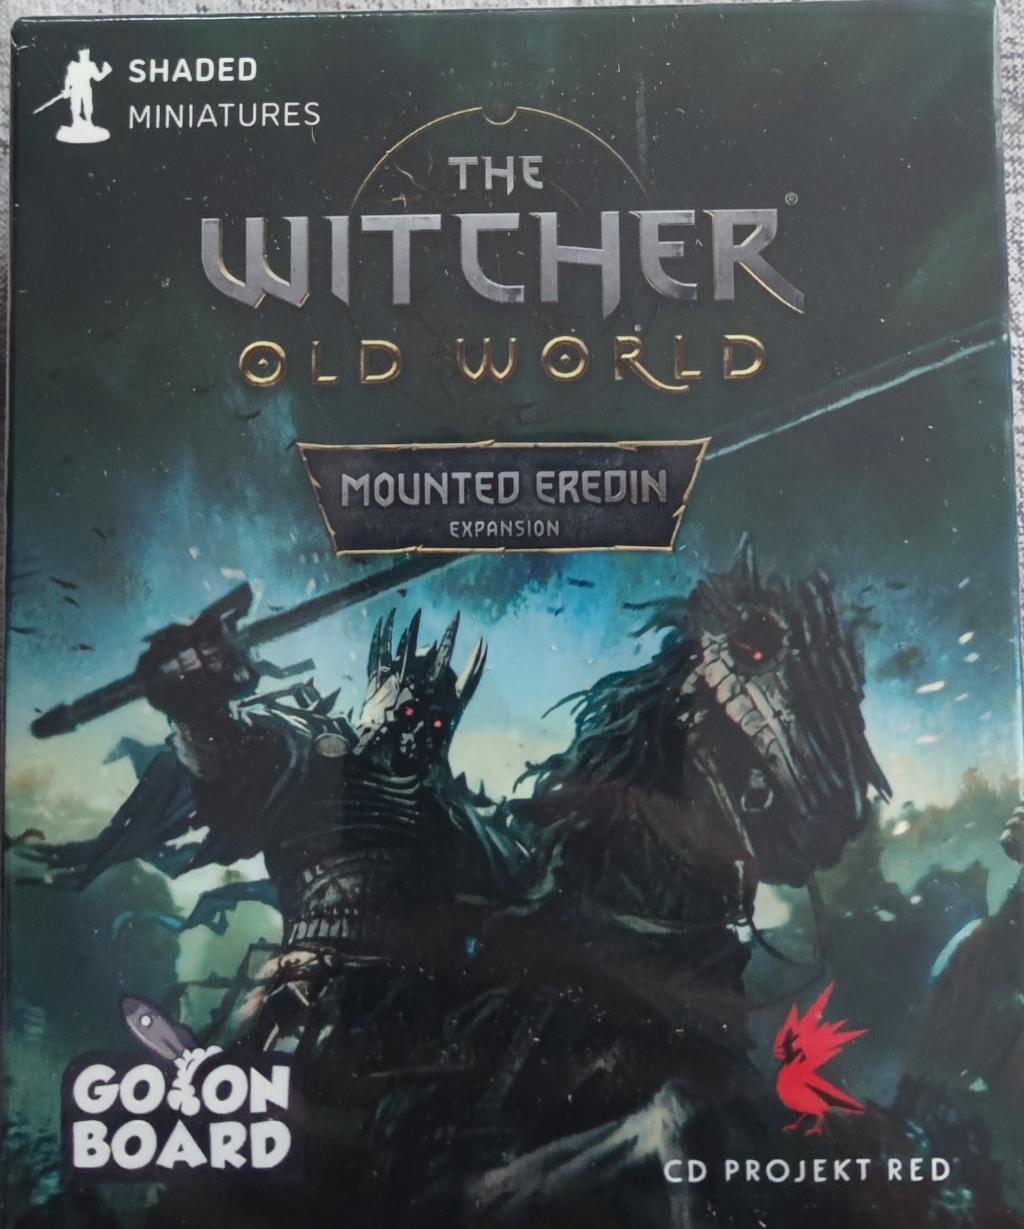 The Witcher : Old World - Mounted Eredin